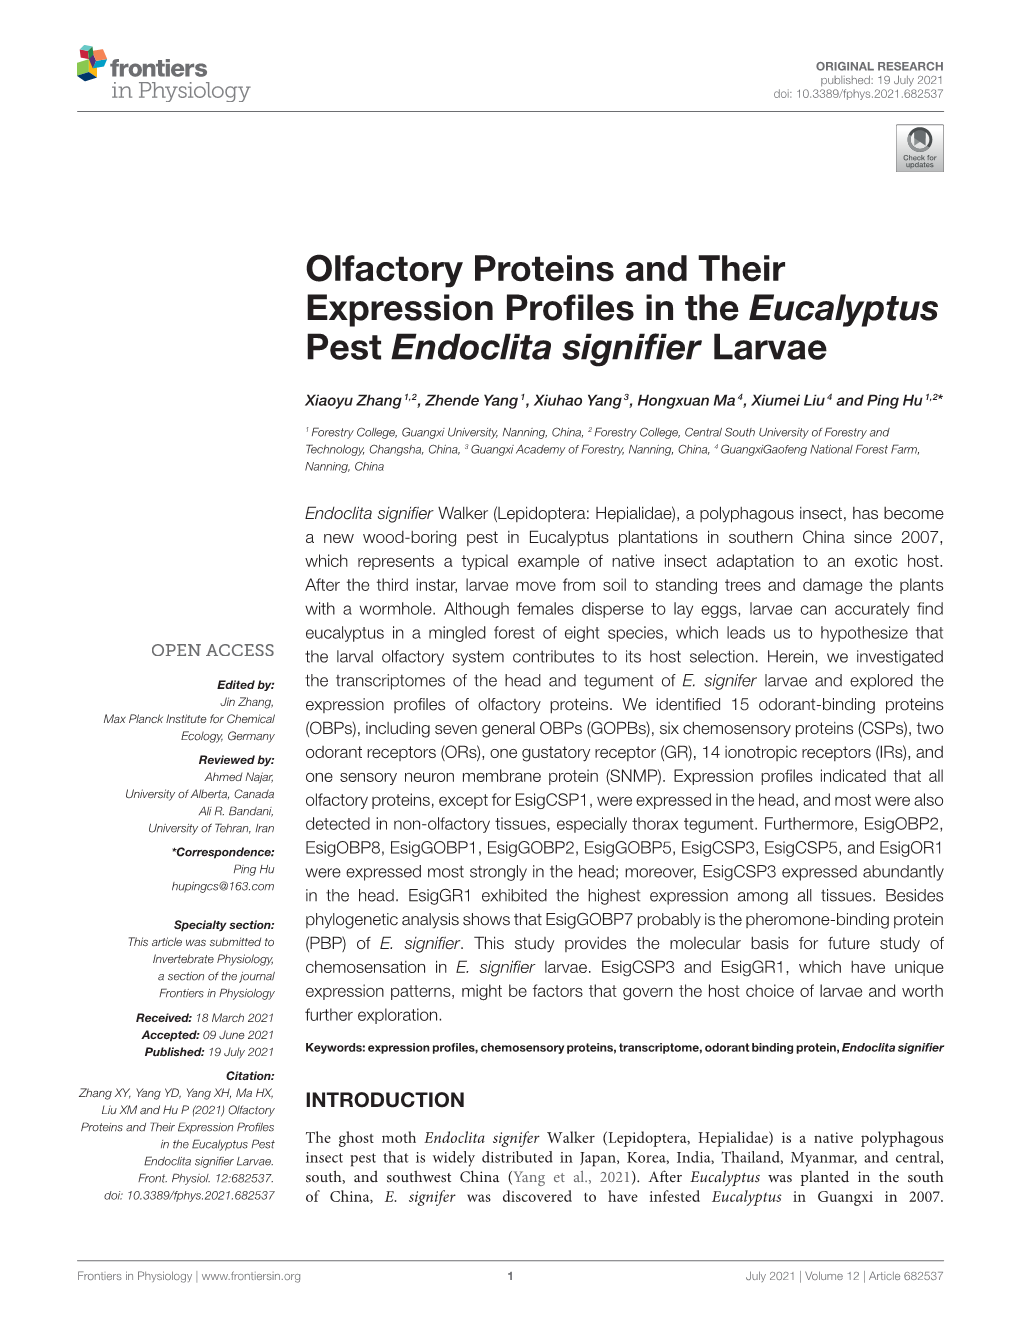 Olfactory Proteins and Their Expression Profiles in The